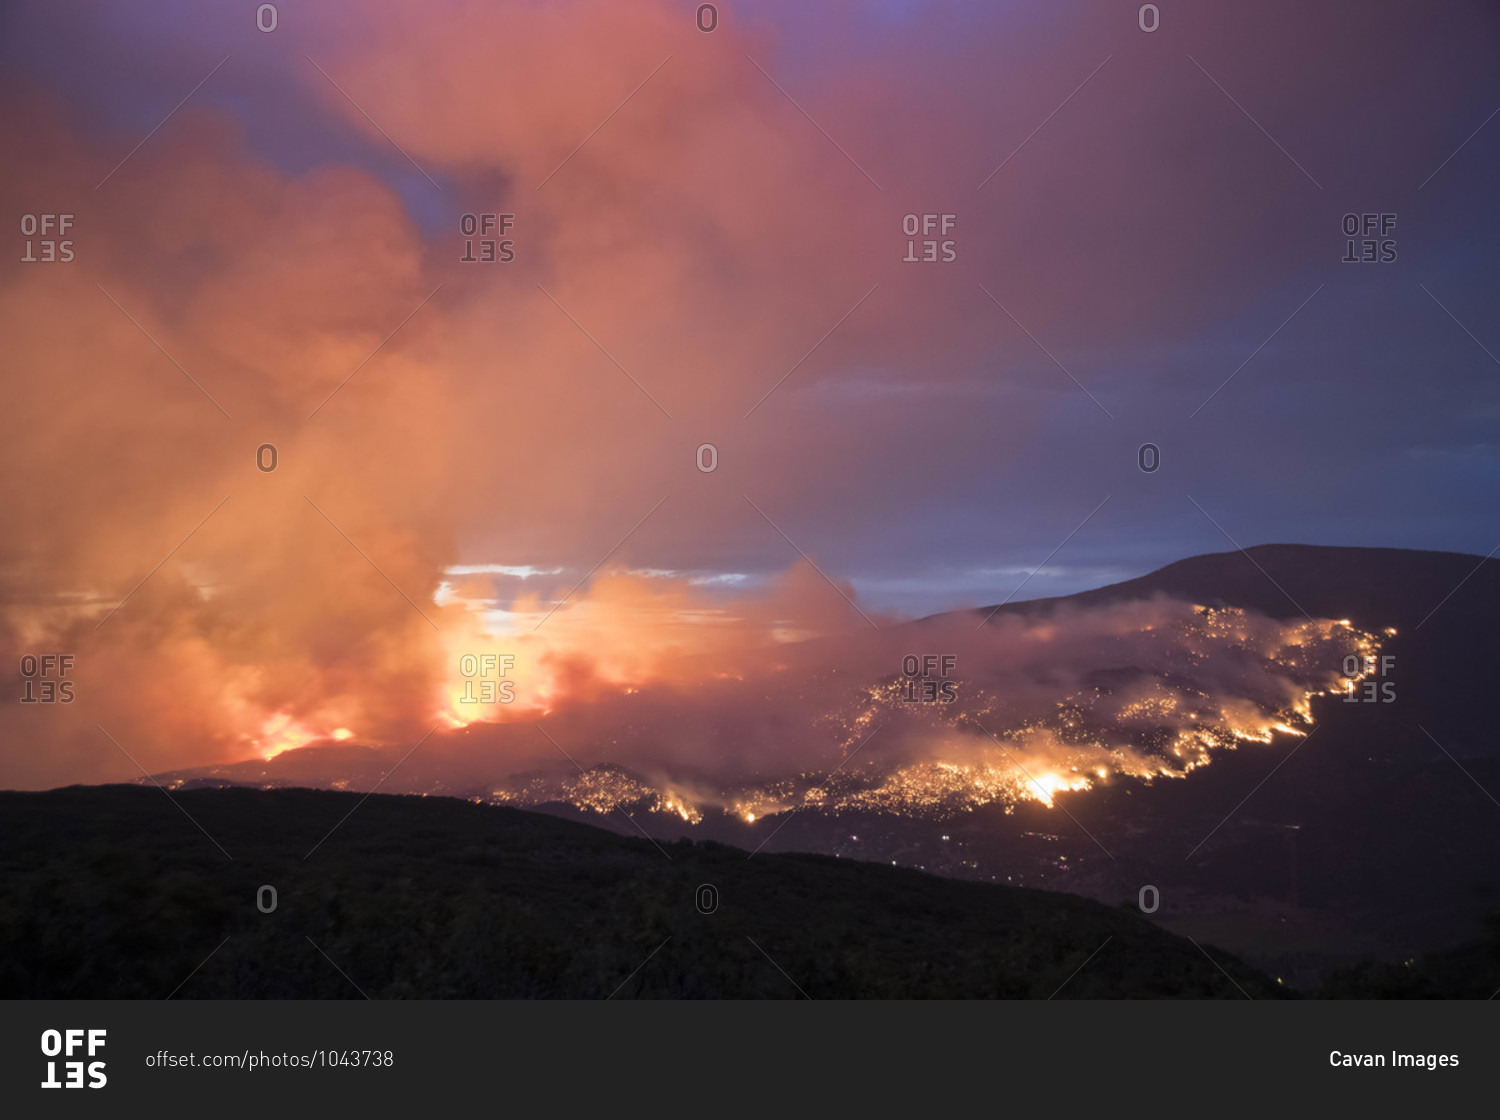 Smoke emitting from wildfire on mountain against sky at dusk